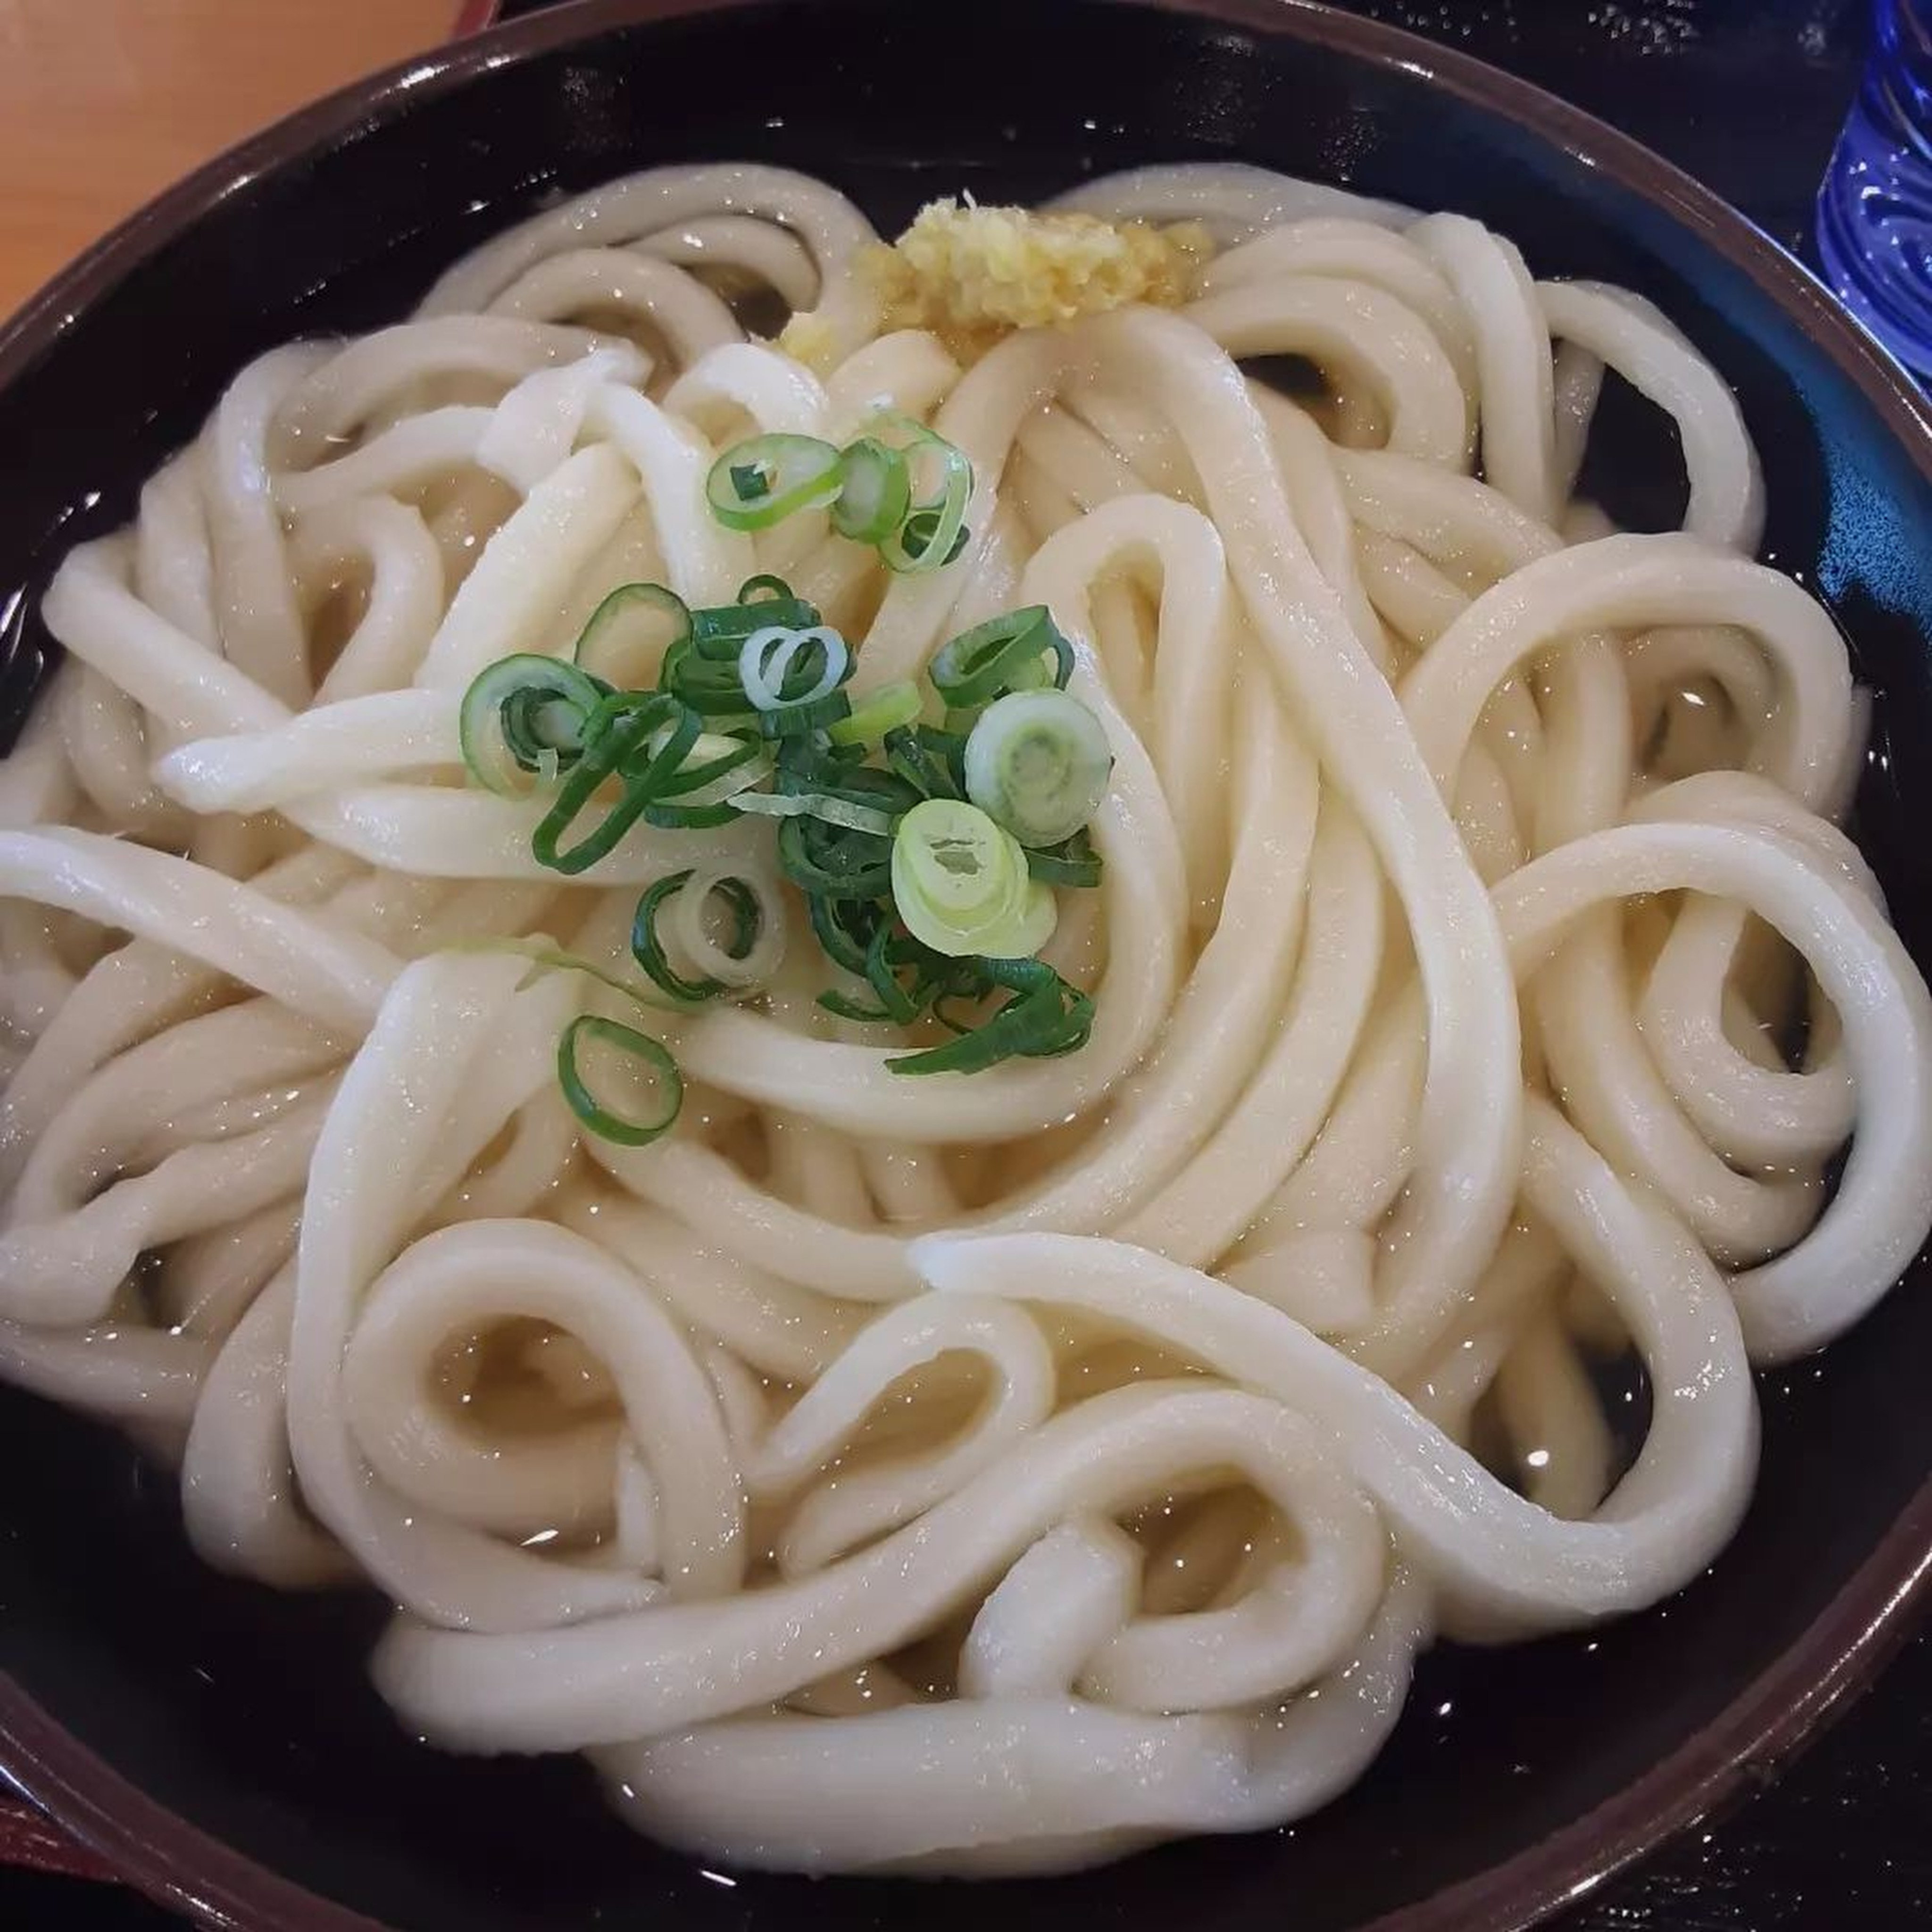 Sanuki udon. Columnist Wee Kek Koon was won over to the merits of the chewy white wheat noodle on a trip to Kagawa, Shikoku, Japan. Photo: Instagram/udonken.t